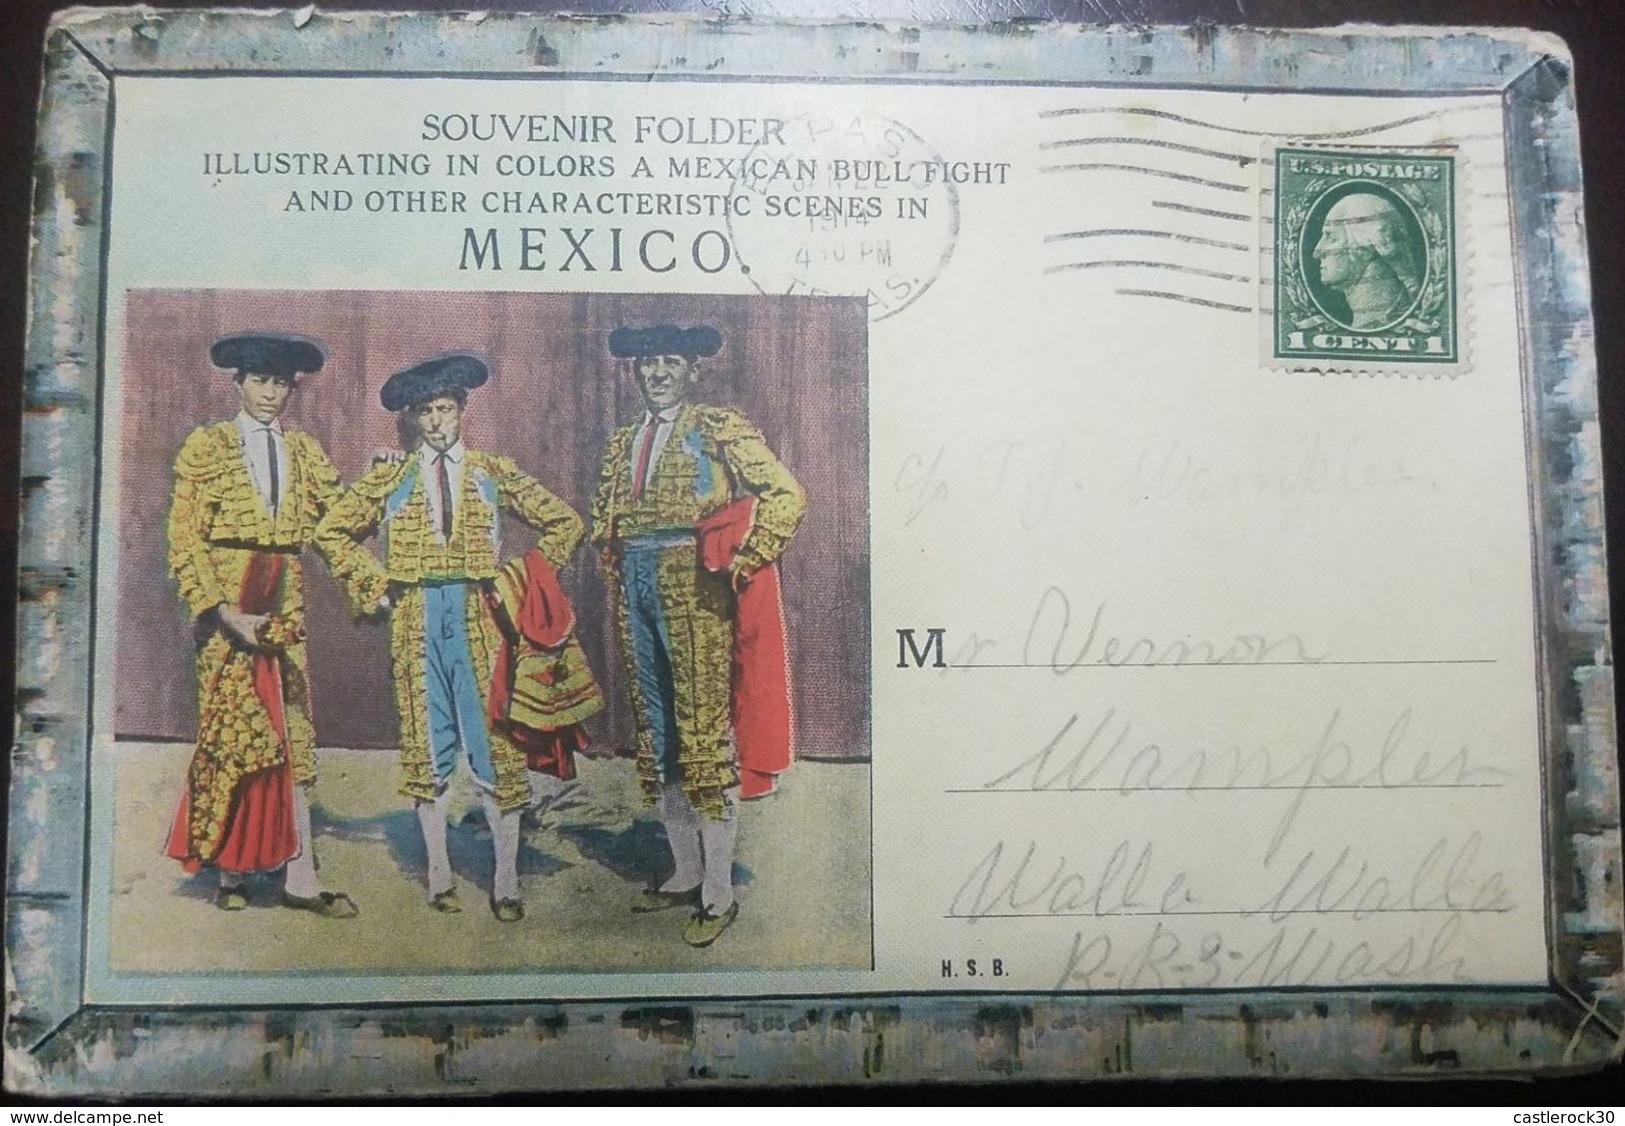 O)  1914 UNITED STATES, SOUVENIR FOLDER MEXICO,  BULLFIGHTING- TRADITIONS-CULTURE-CULTIRA, WASHINGTON 1 CENT GREEN, FROM - 1901-20